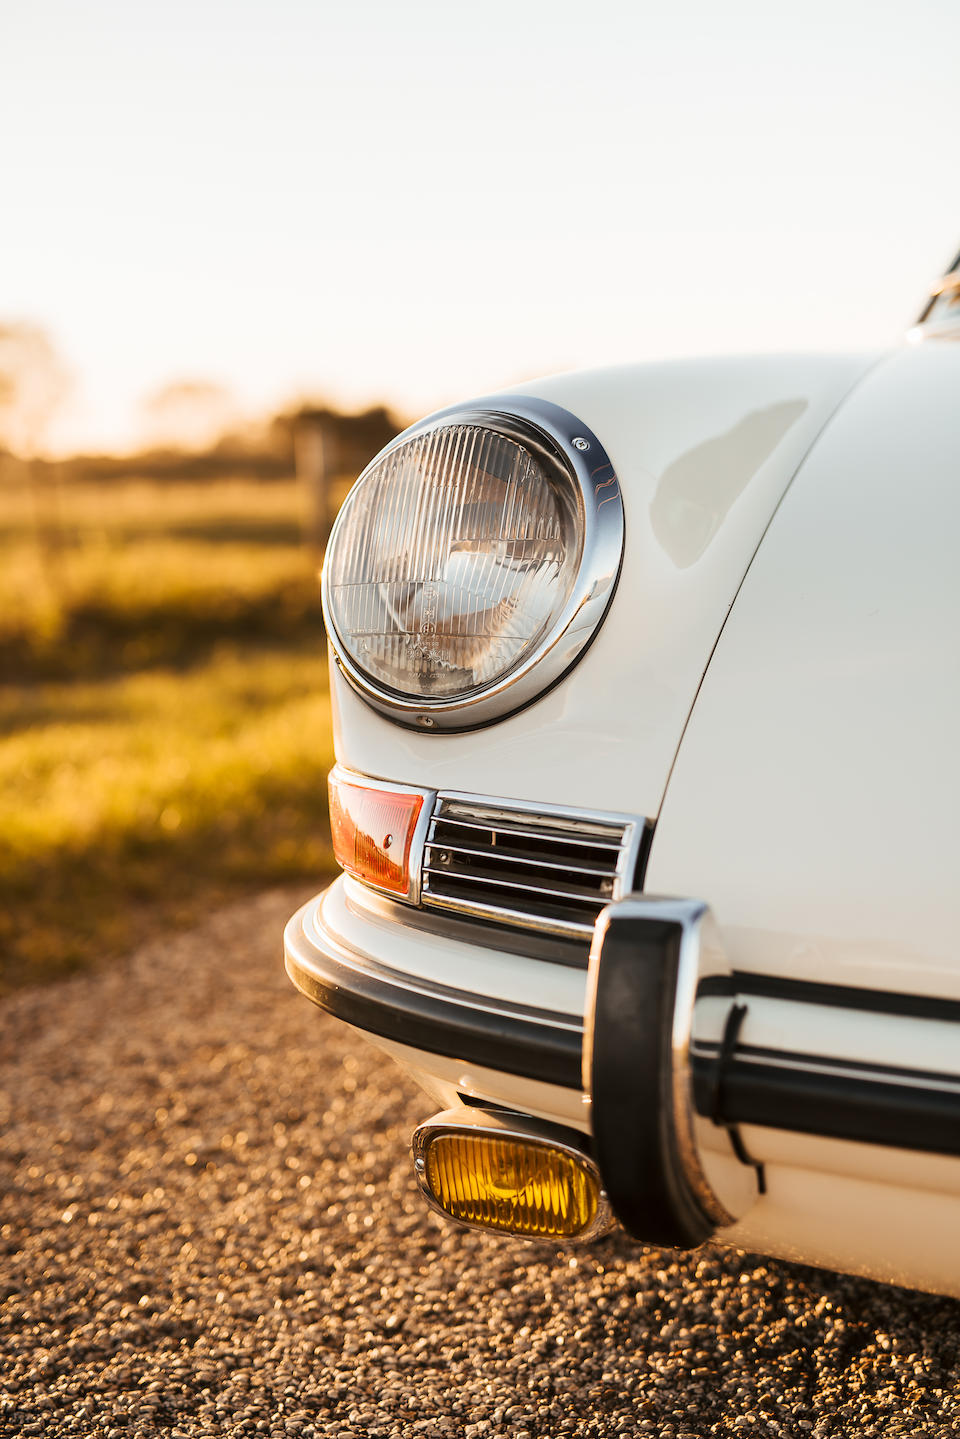 <B>1967 PORSCHE  911S 2.0 COUPE<br /></B><BR />Chassis no. 306131S<BR />Engine no. 961094